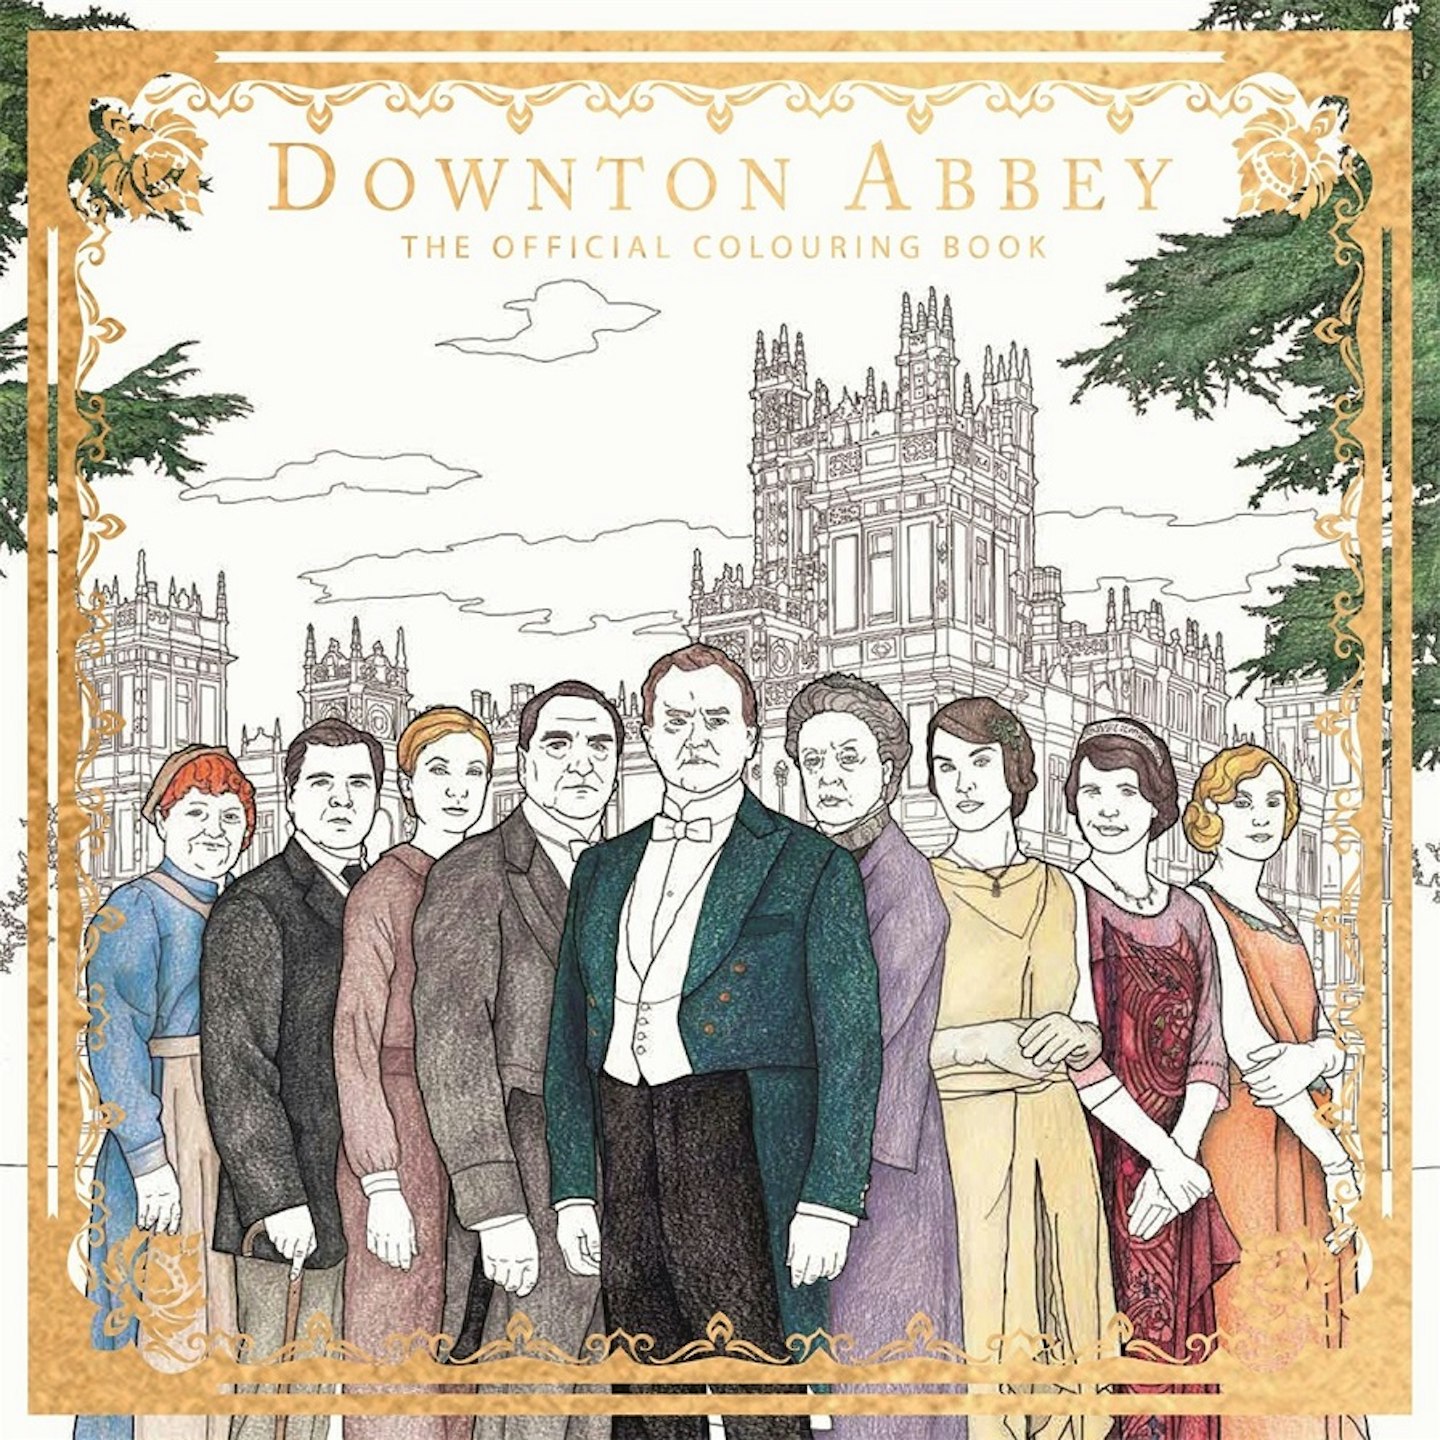 Downton Abbey: The Official Colouring Book, £8.98